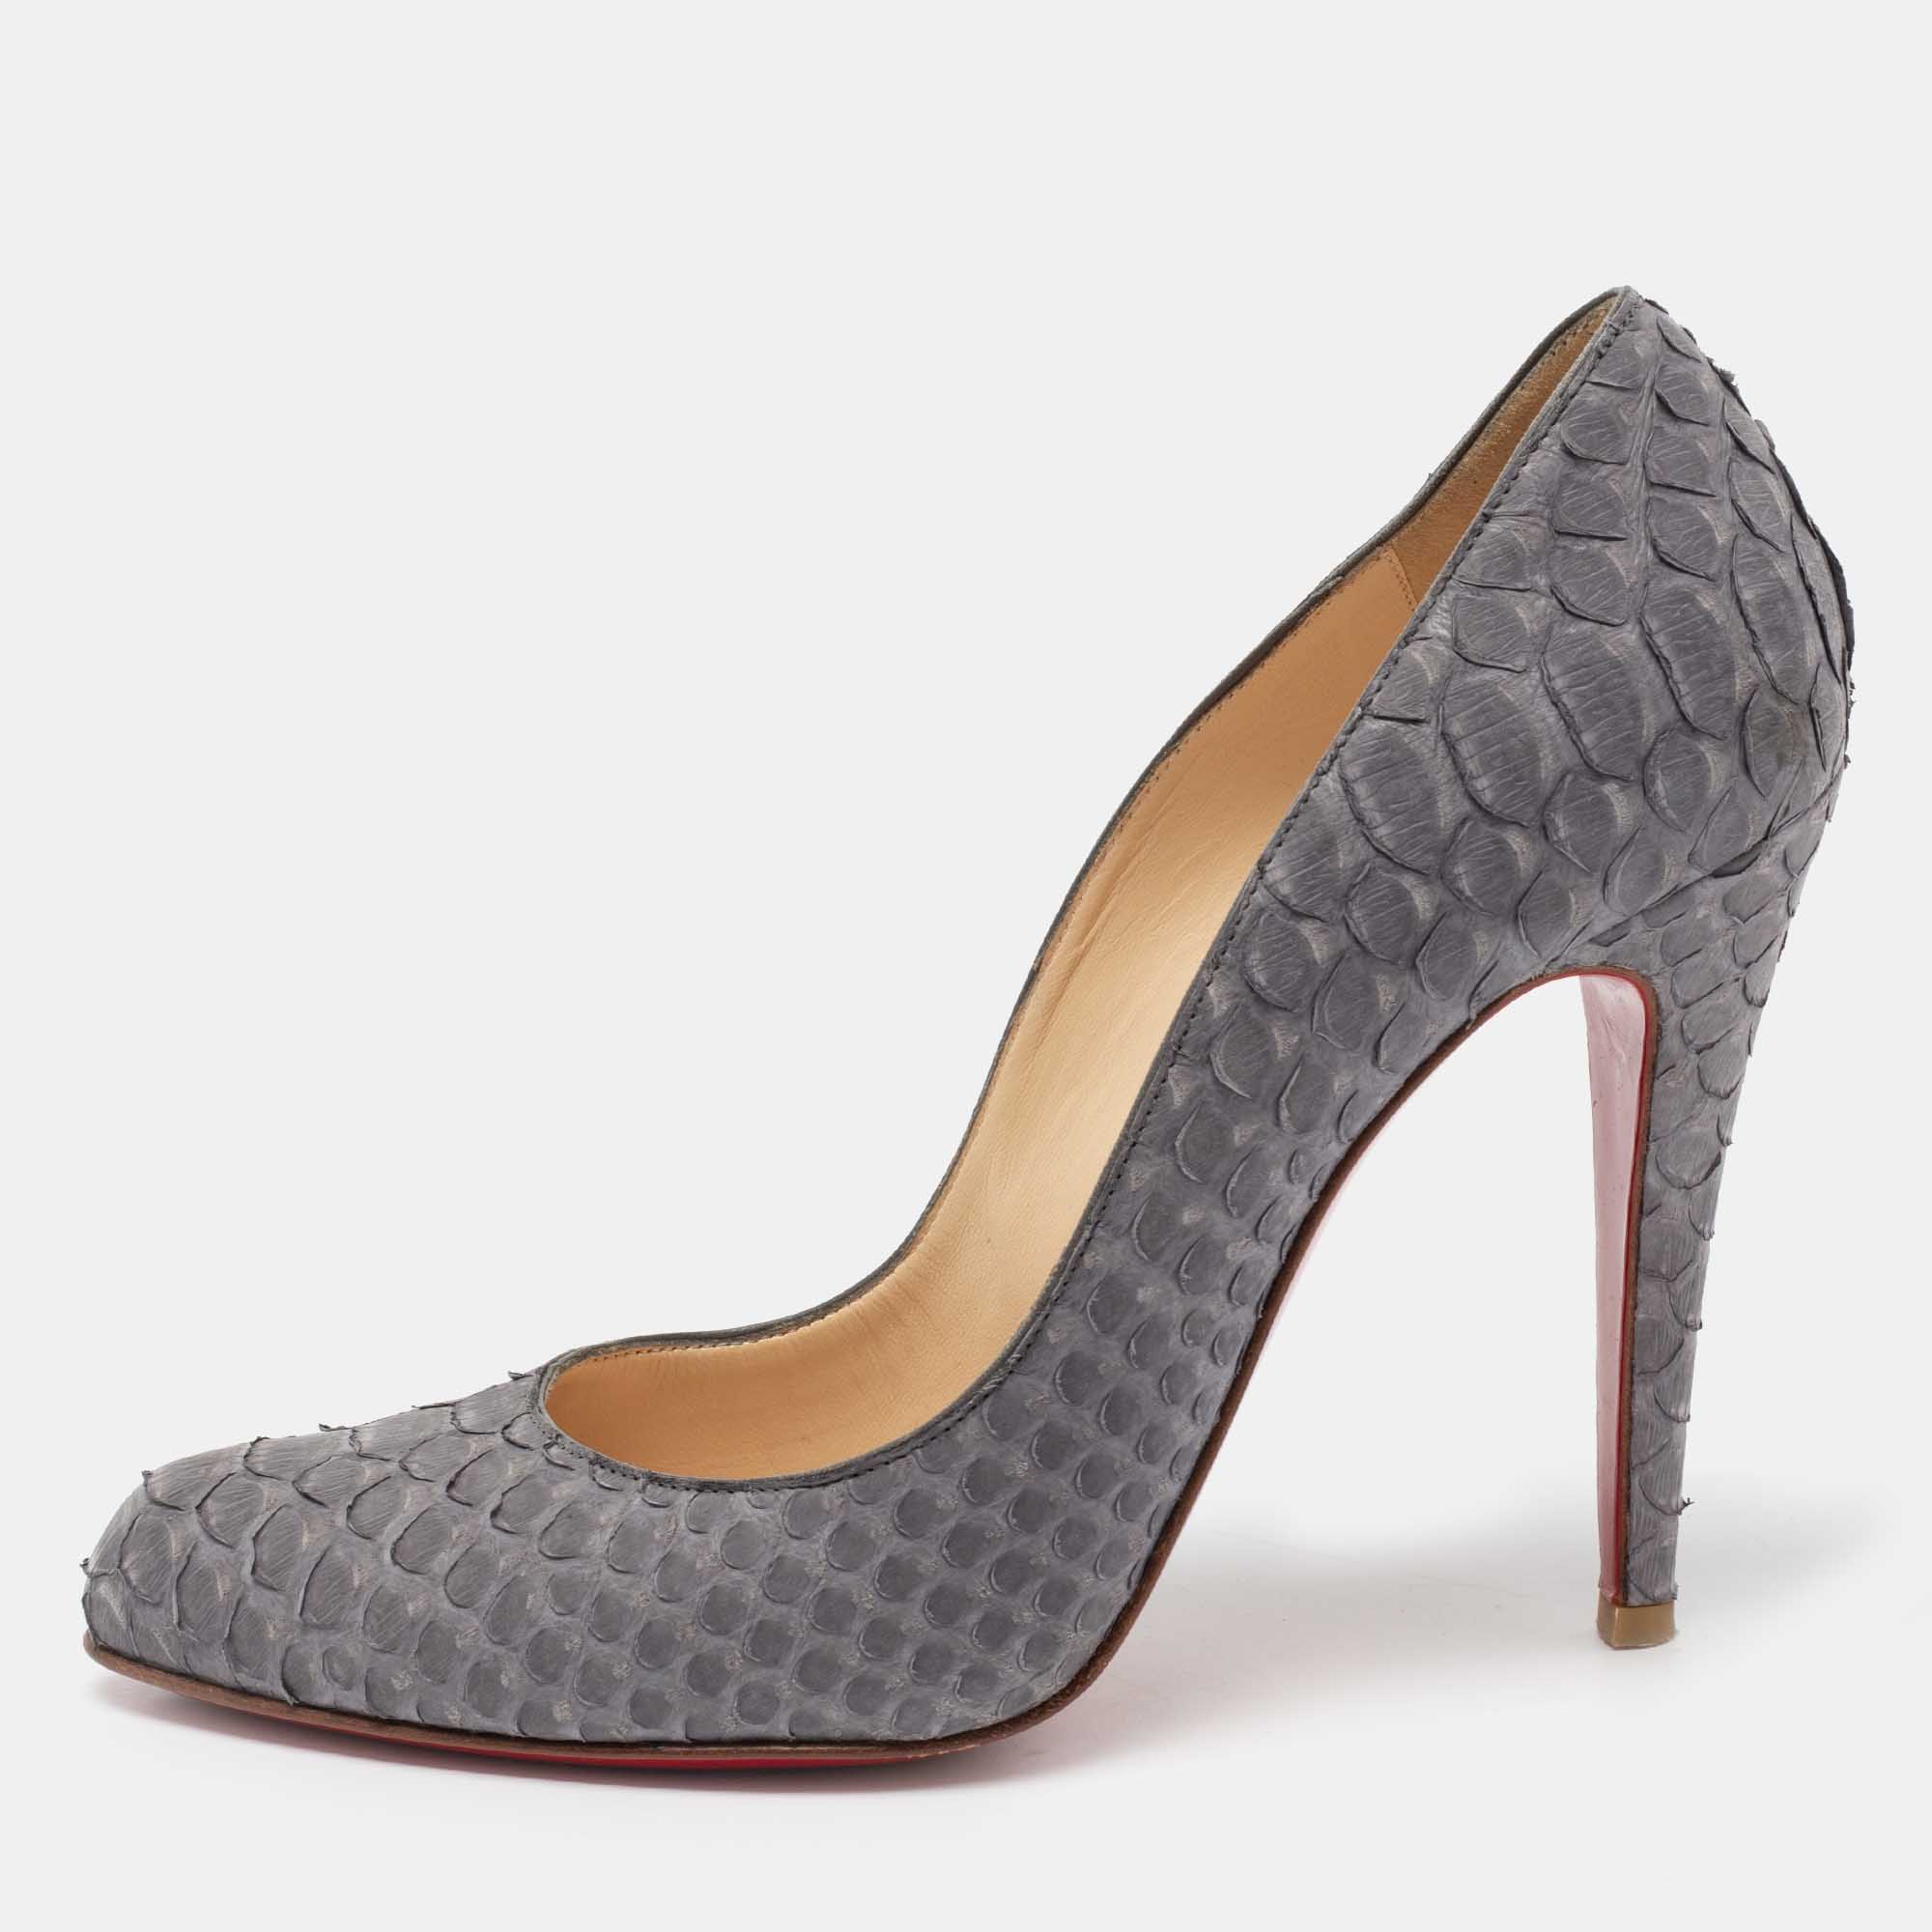 Minimal in design this pair of Fifi pumps from Christian Louboutin is defined by its smooth curves and precise lines. Crafted from python leather in a grey shade it features round toes the signature red lacquered soles and a leather lined insole. An ideal choice for various occasions these shoes are complete with 11cm heels.